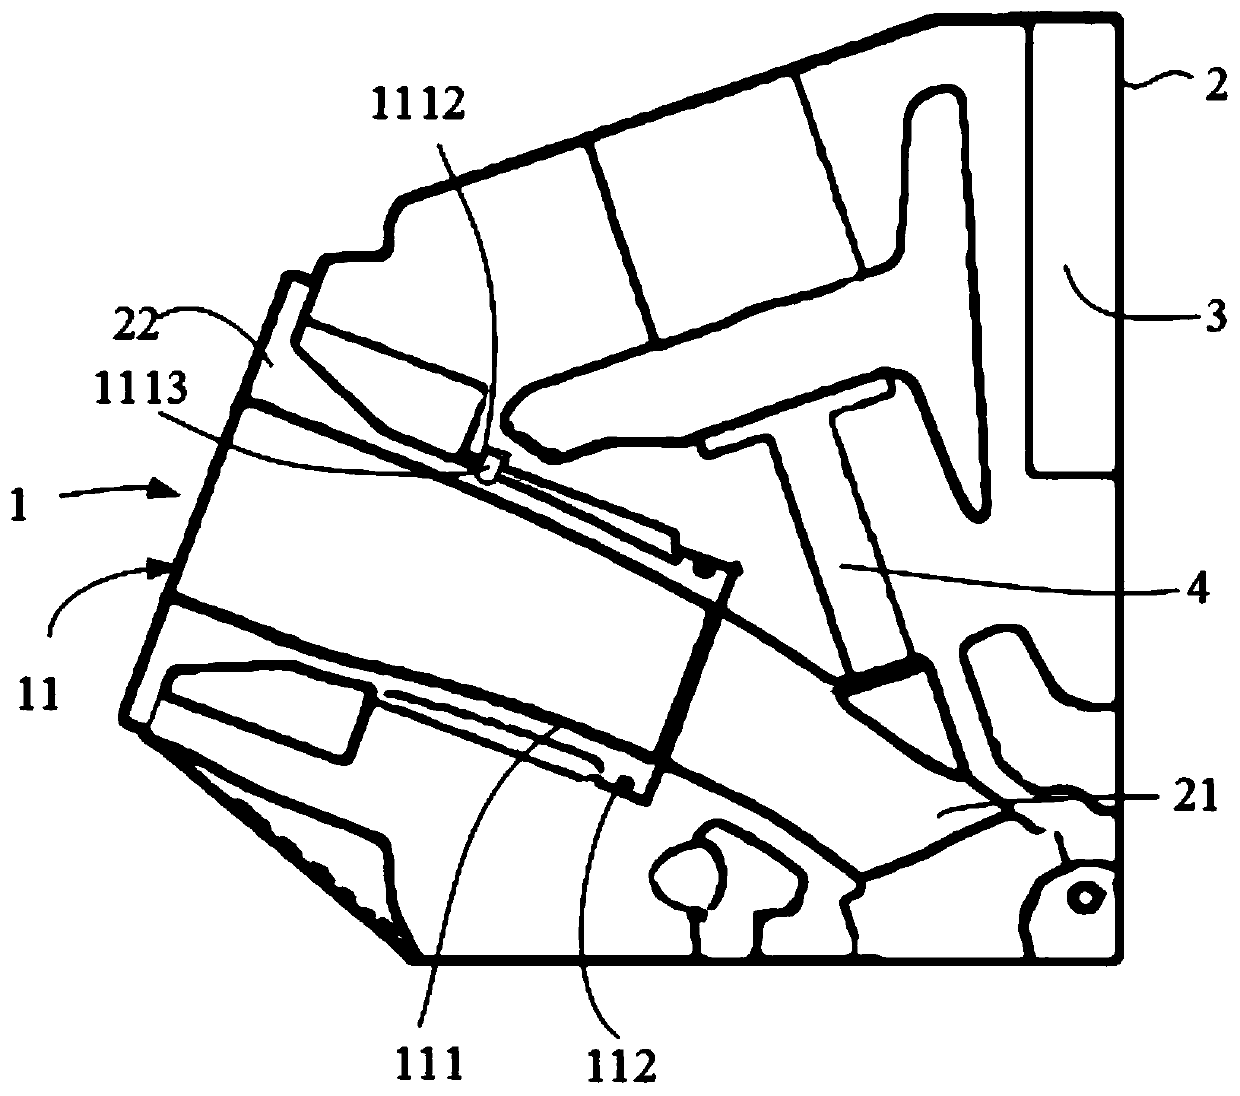 Air intake system of engine